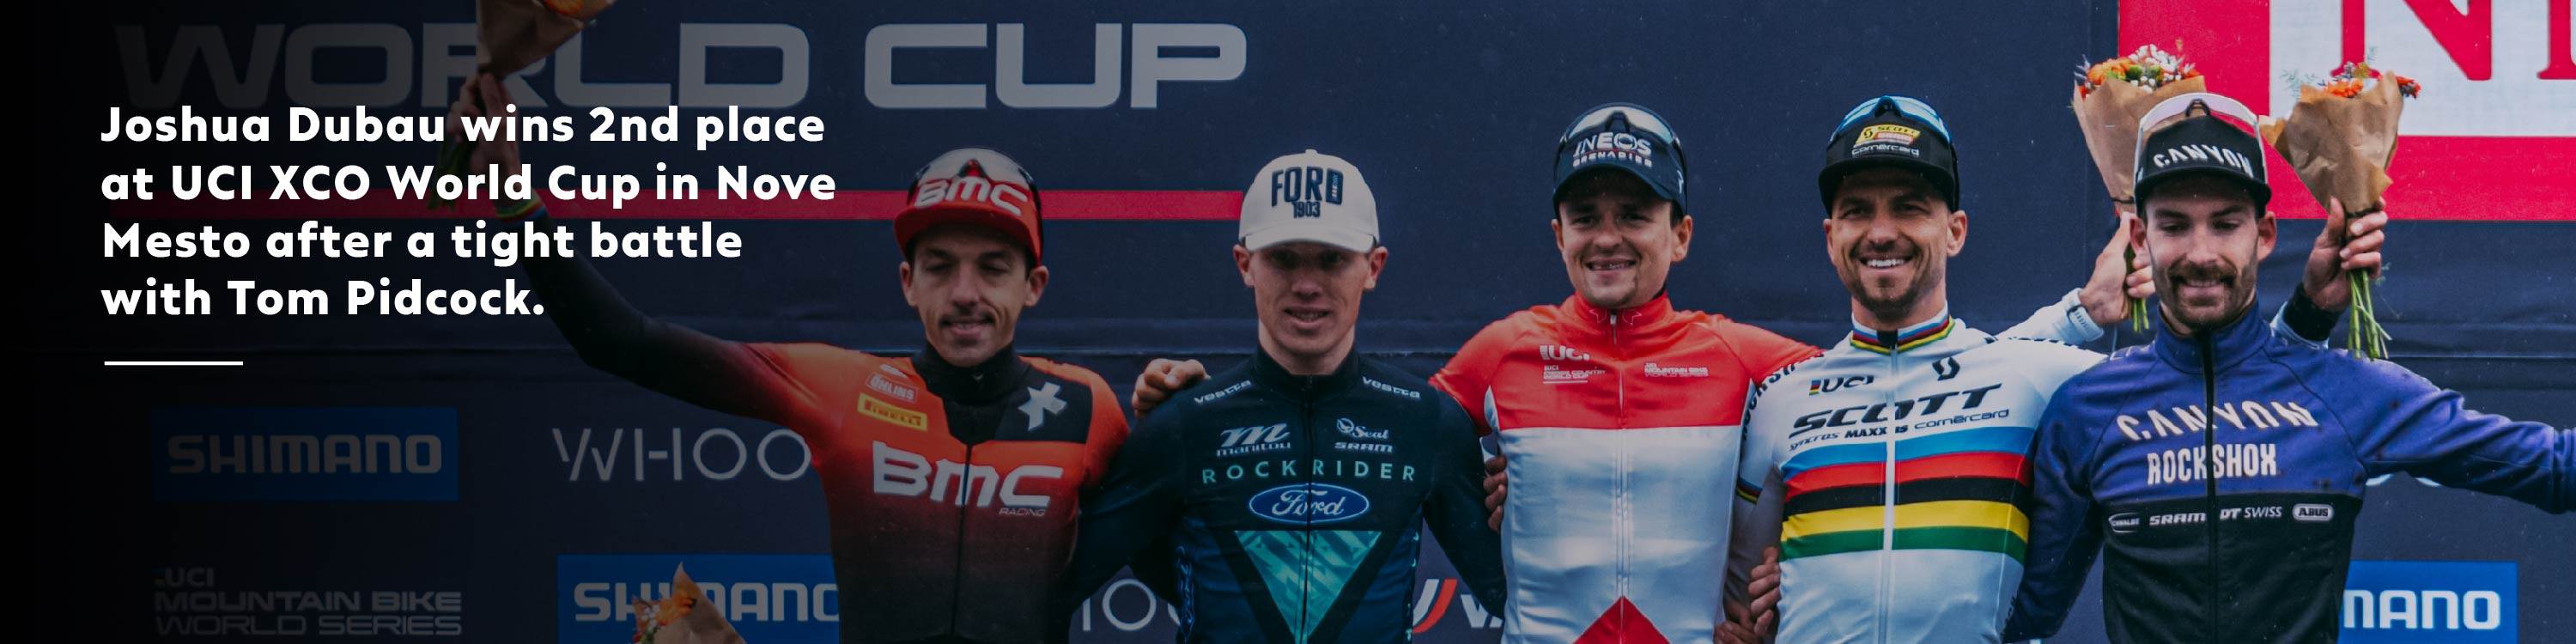 Joshua Dubau wins 2nd place at UCI XCO World Cup in Nove Mesto after a tight battle with Tom Pidcock.